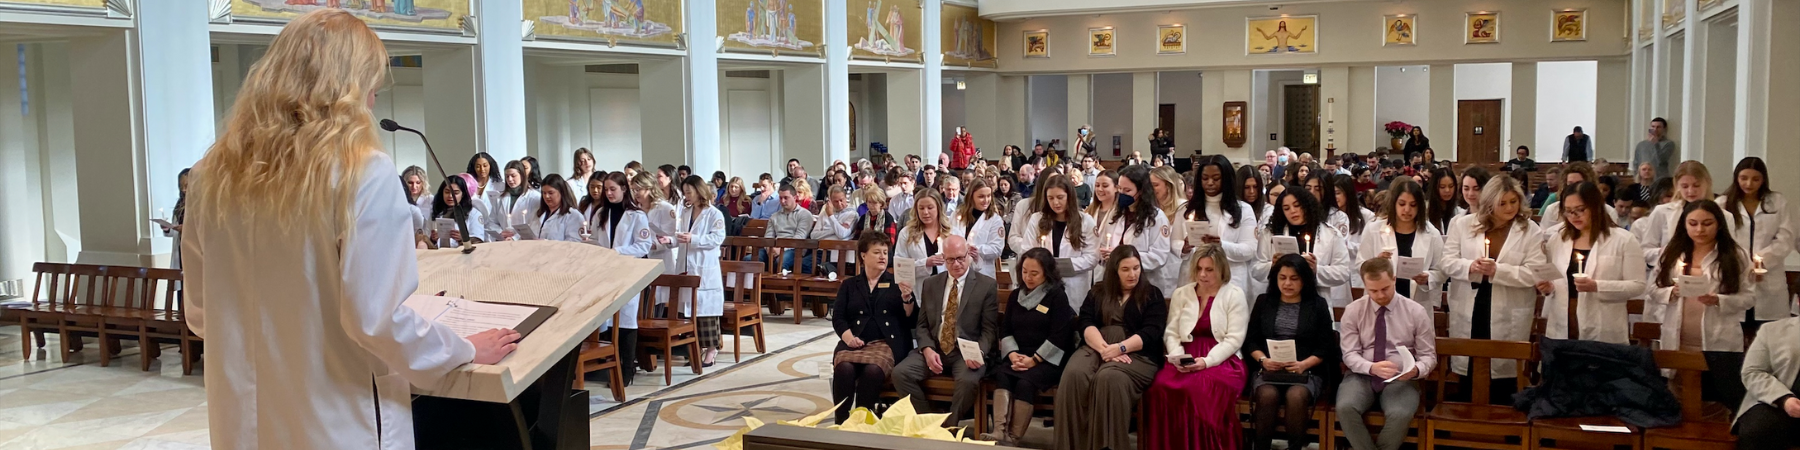 Nursing students at the Dedication to the Profession